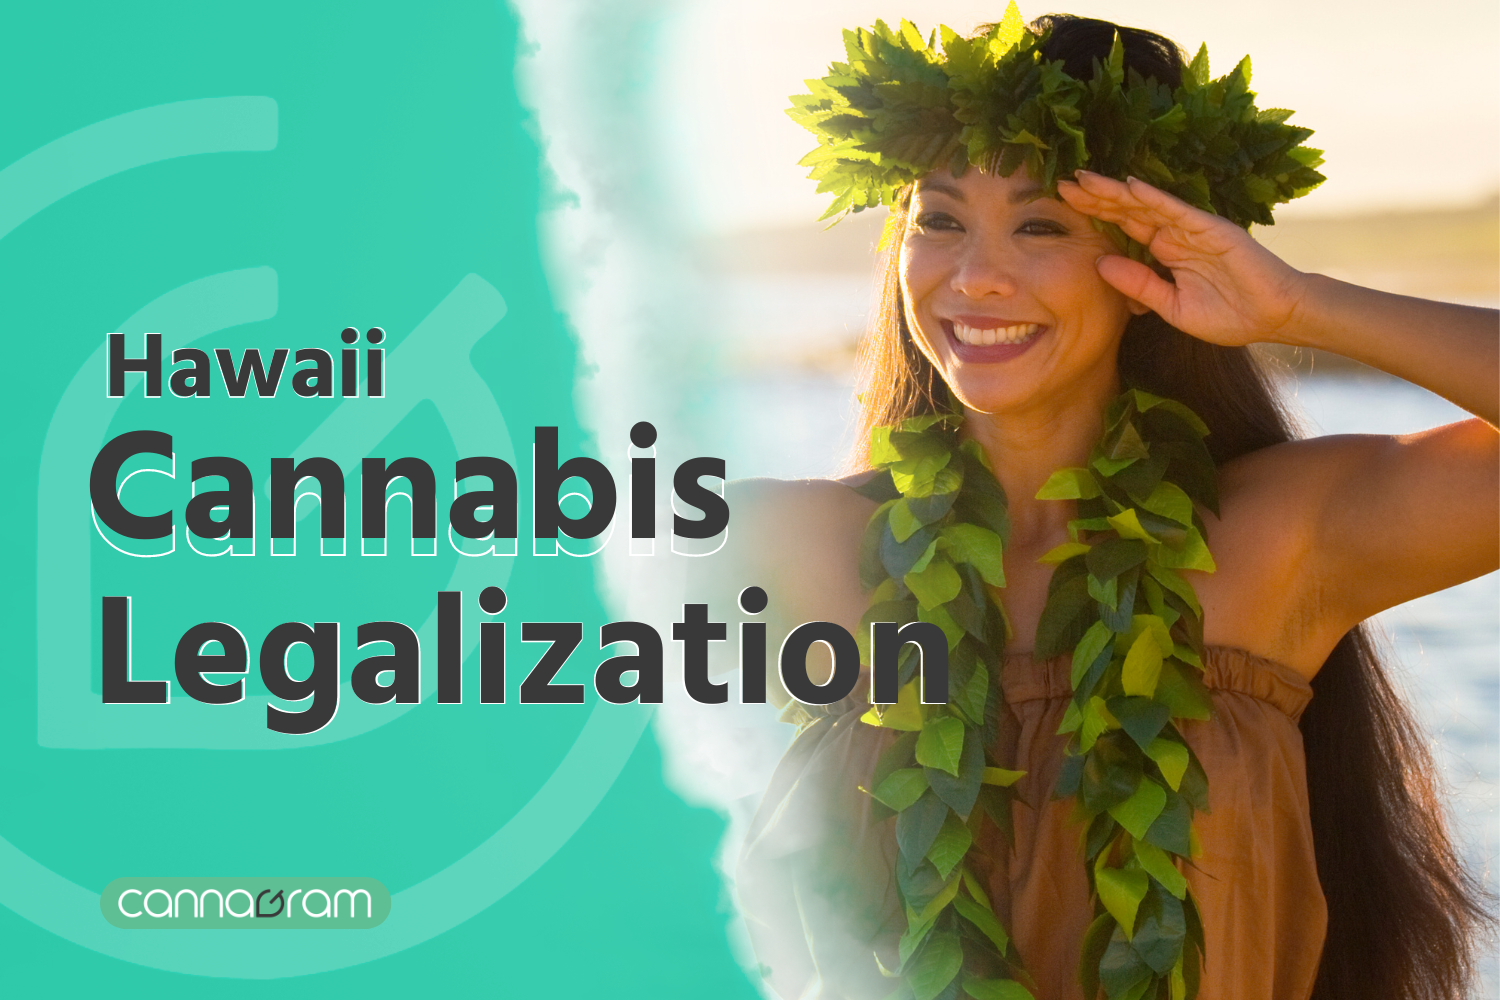 A Hawaiian woman with a radiant smile, wearing a traditional lei made of green leaves, salutes with her hand to her forehead, embodying the joy and spirit of Hawaii amidst news of cannabis legalization